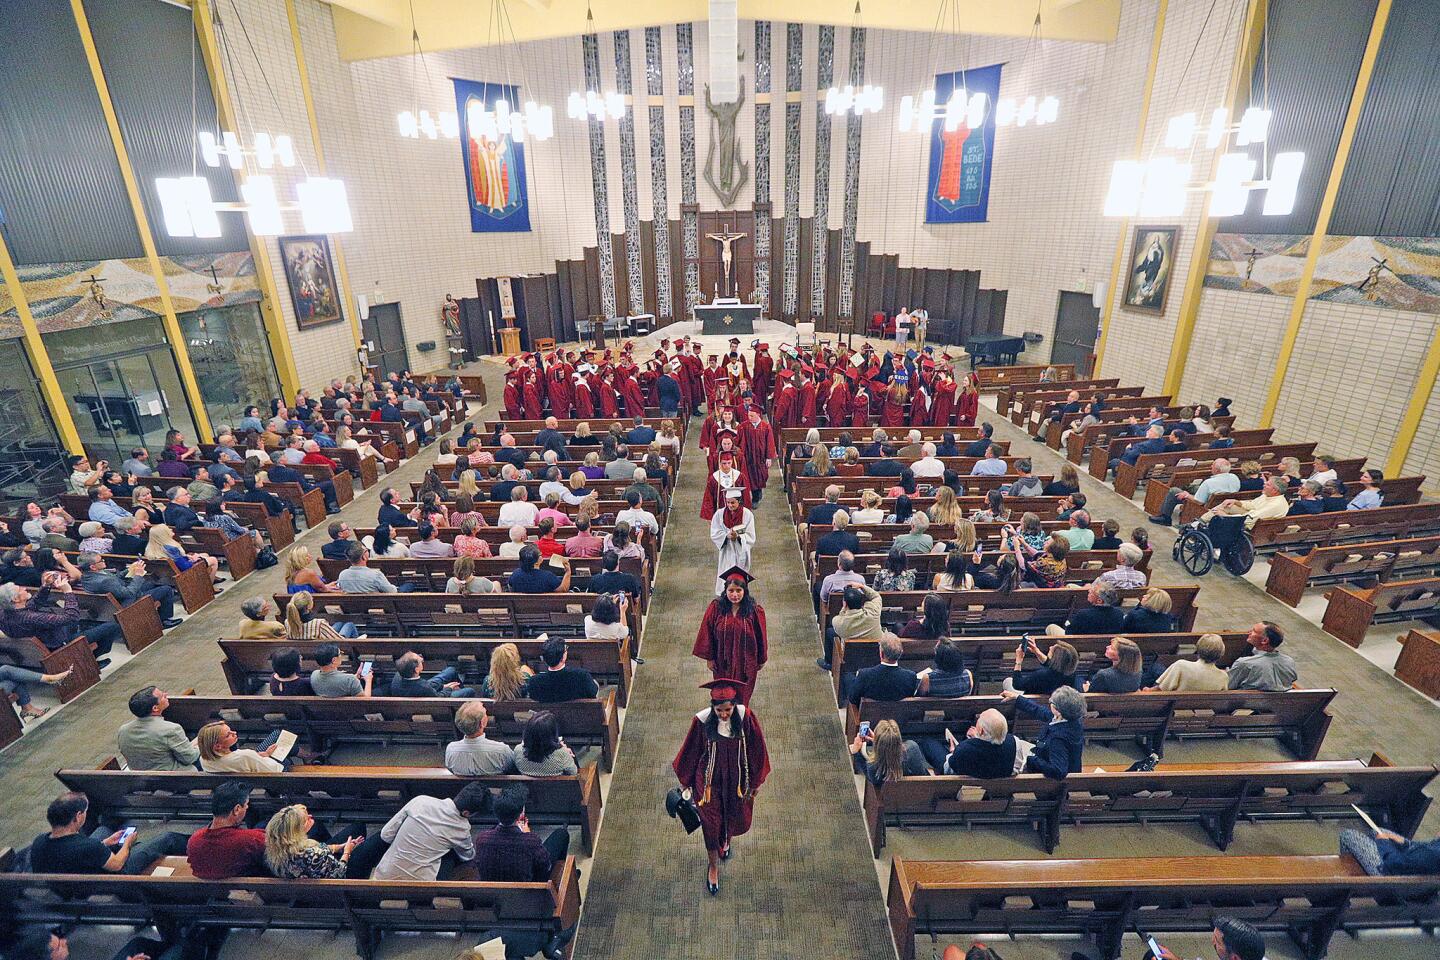 Students exit after the annual interfaith 2018 Baccalaureate Service in honor of our graduating class of 2018 on Tuesday, May 29, 2018. The highest number of religions ever were present at the ceremony.